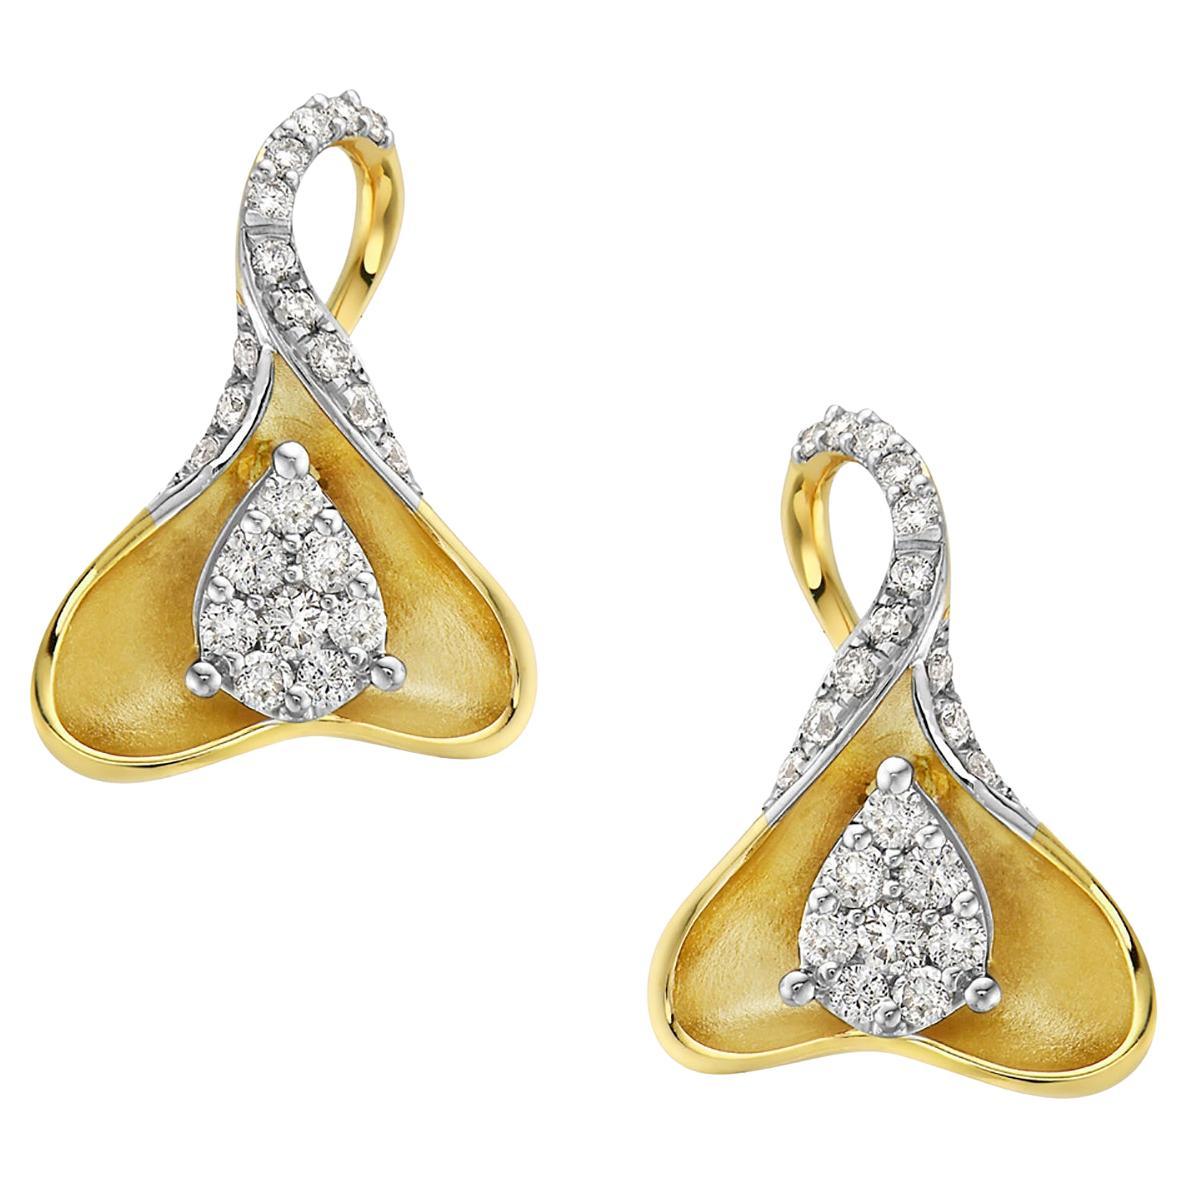 Folded Petal Shaped Stud Earrings Accented with Diamonds Made in 14k Yellow Gold